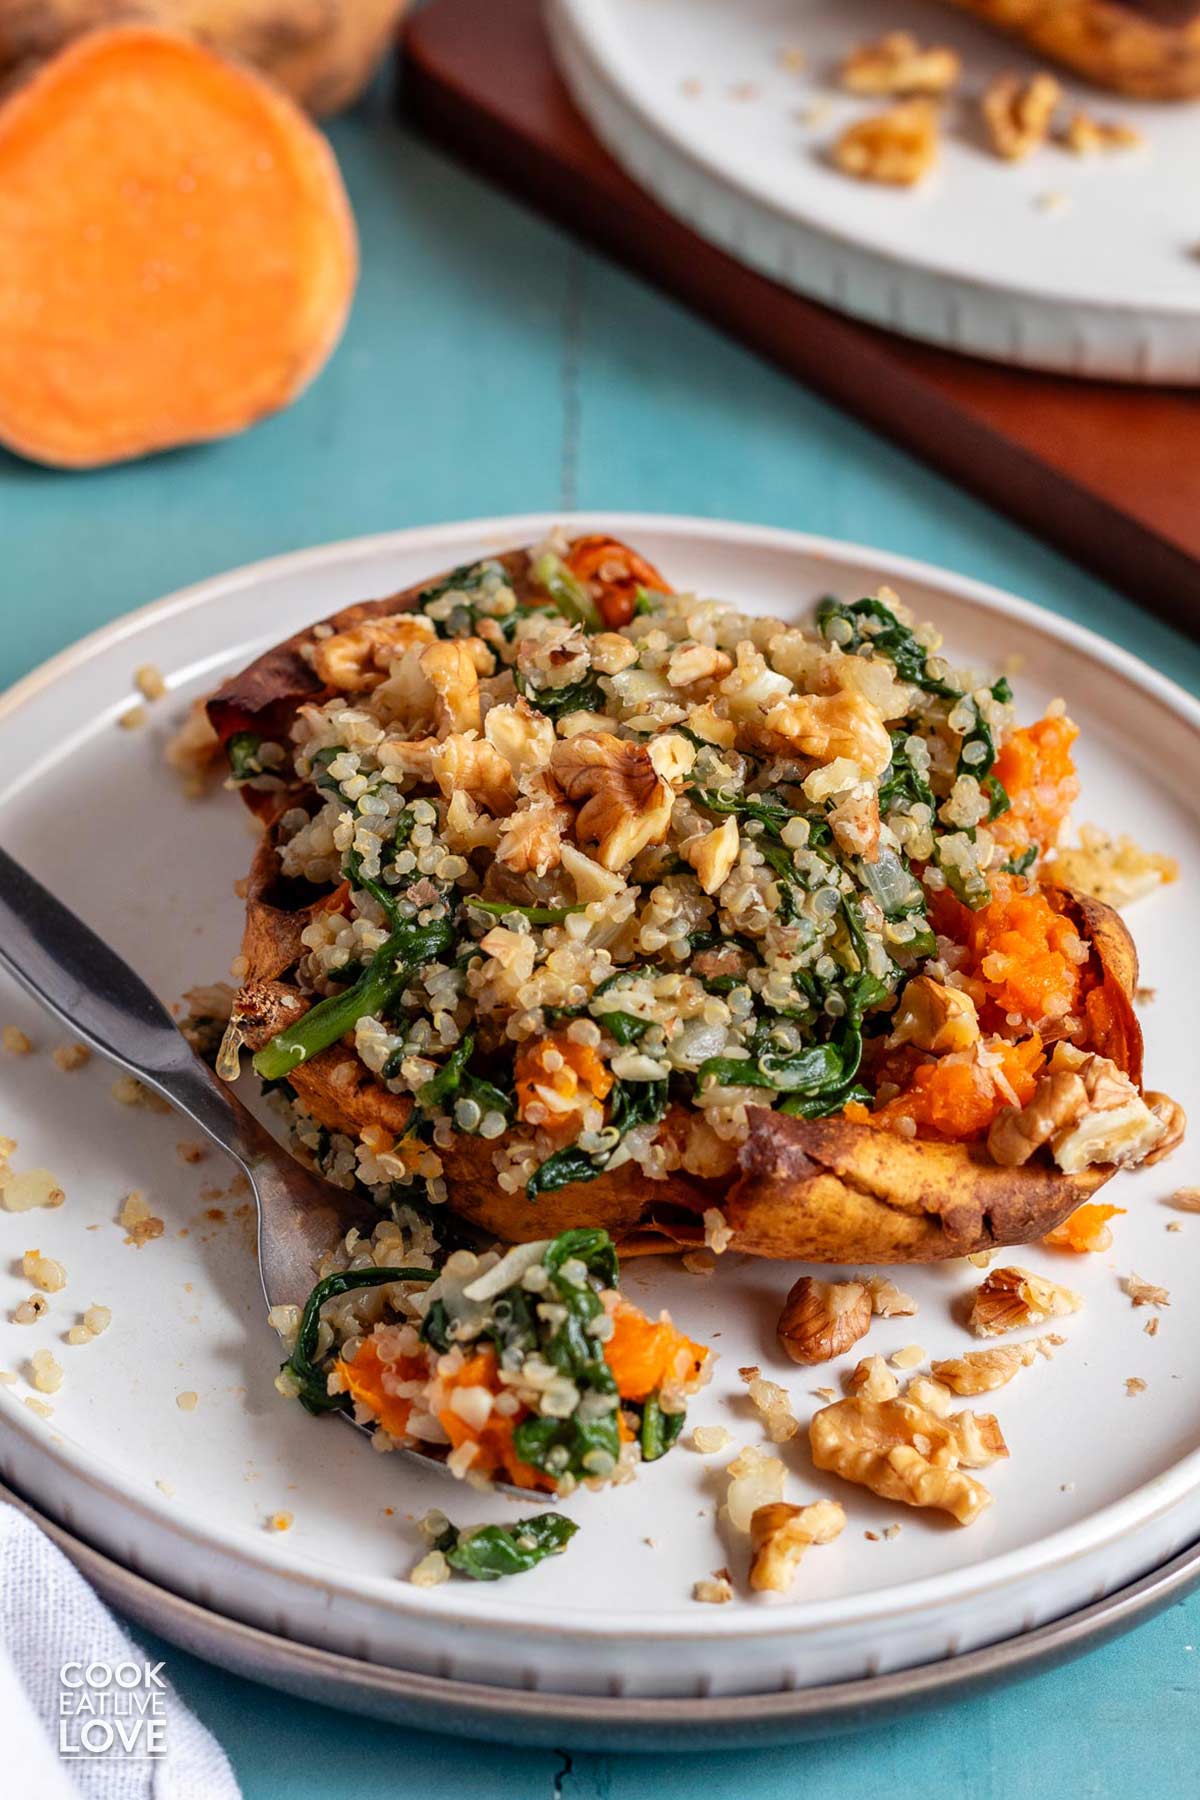 A baked stuffed sweet potato with quinoa and spinach served on a whtie plate.